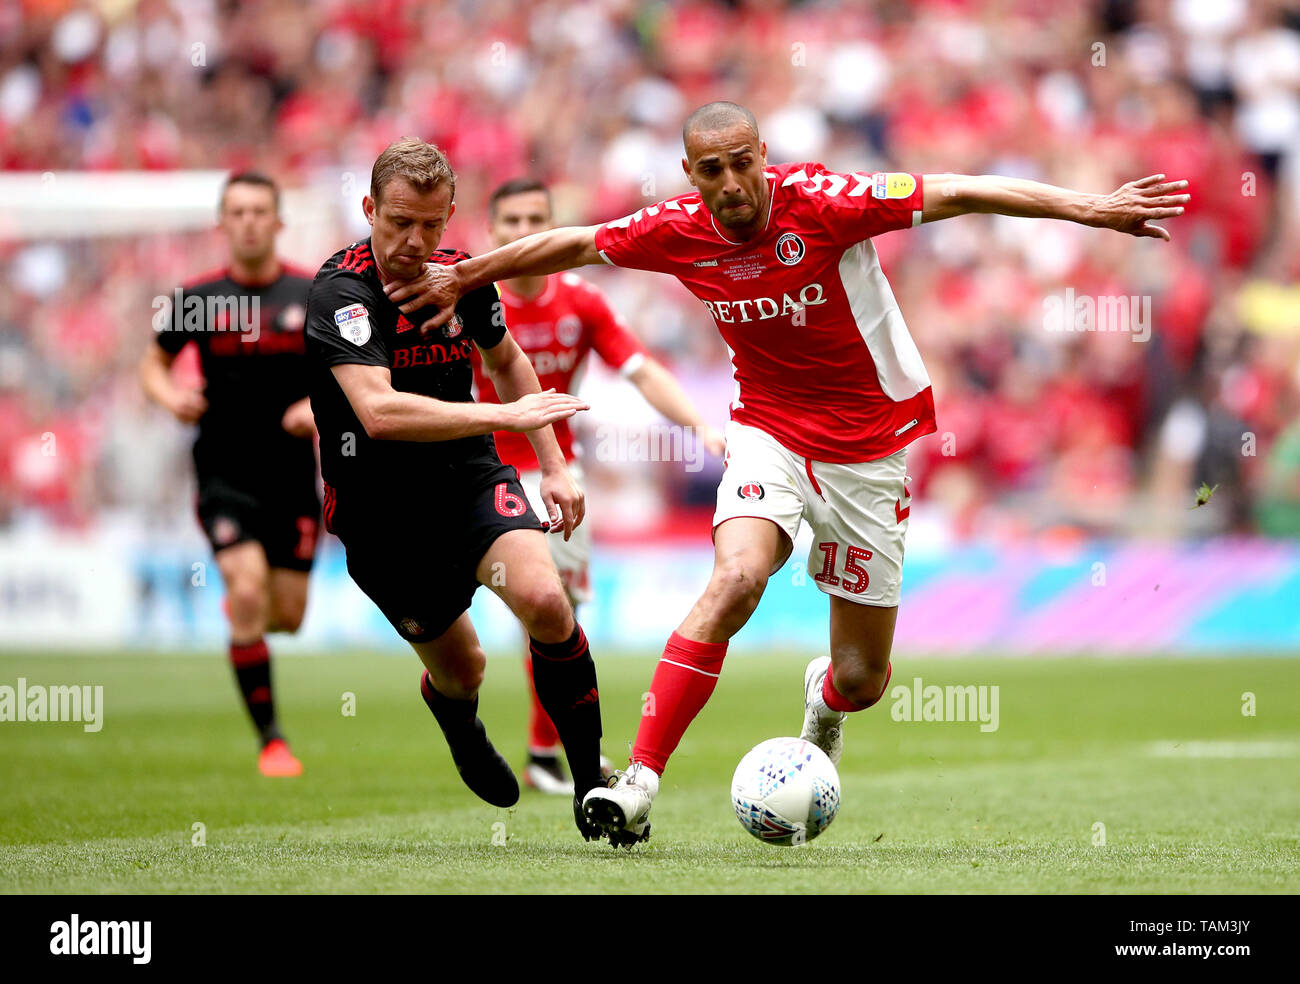 Charlton Athletic's Darren Pratley (right) and Sunderland's Lee Cattermole battle for the ball during the Sky Bet League One Play-off final at Wembley Stadium, London. Stock Photo